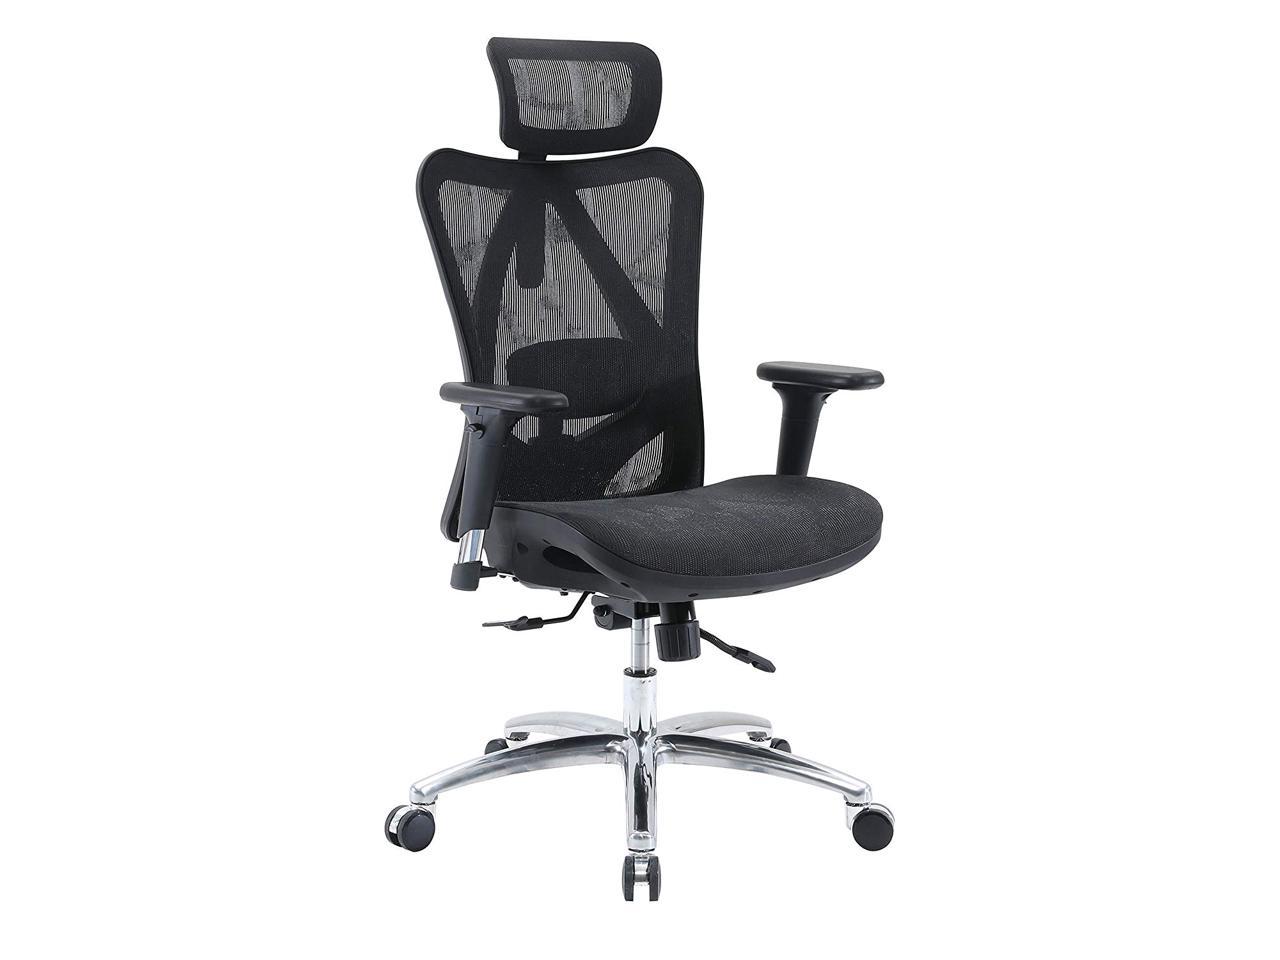 Ergonomic Adjustable Office Chair Home Computer Network Chair Mesh Chair 